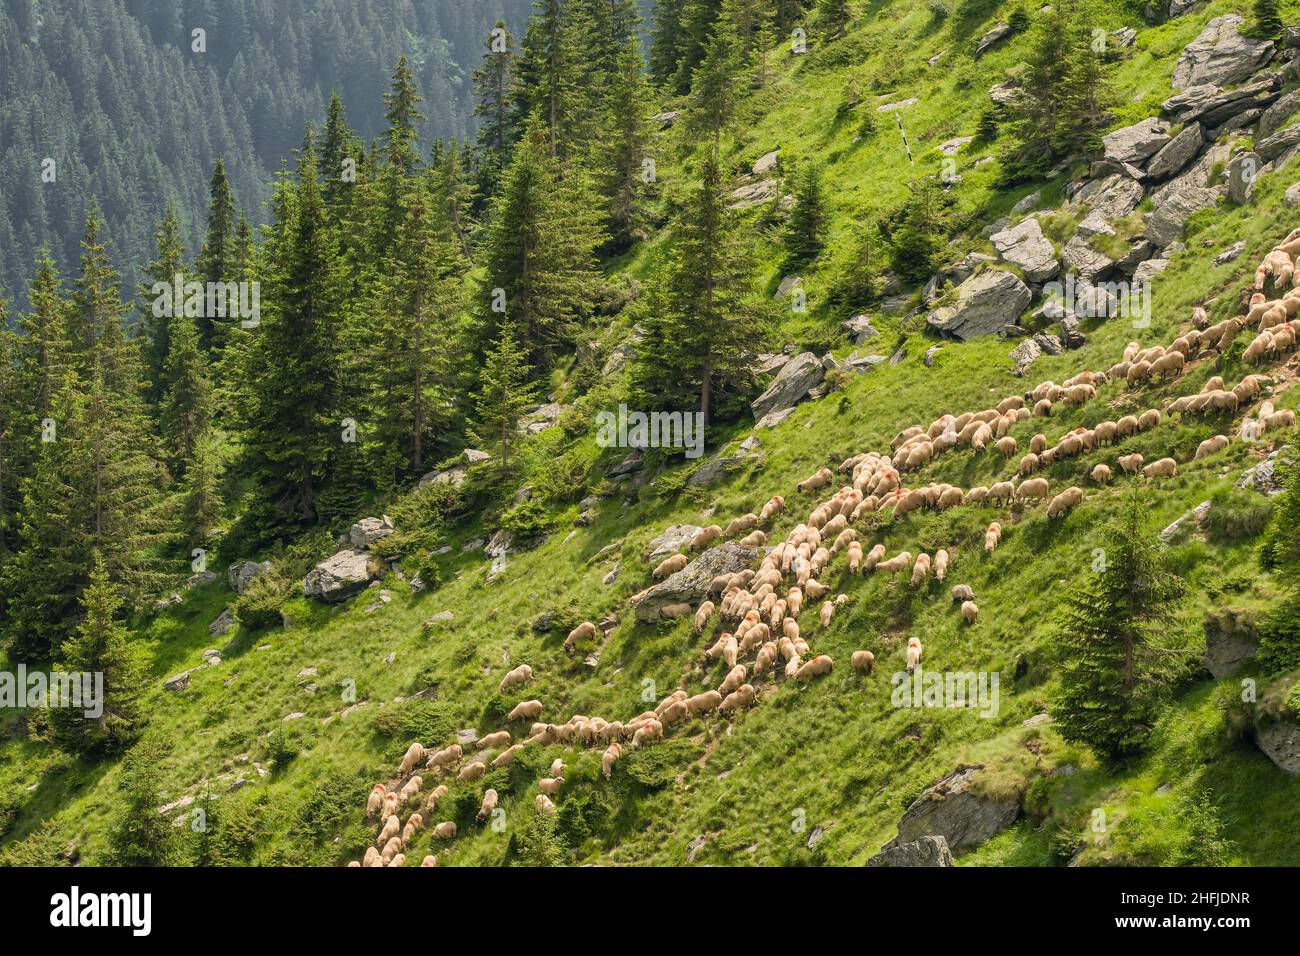 Big Herd of sheeps grazing in mountains. Stock Photo